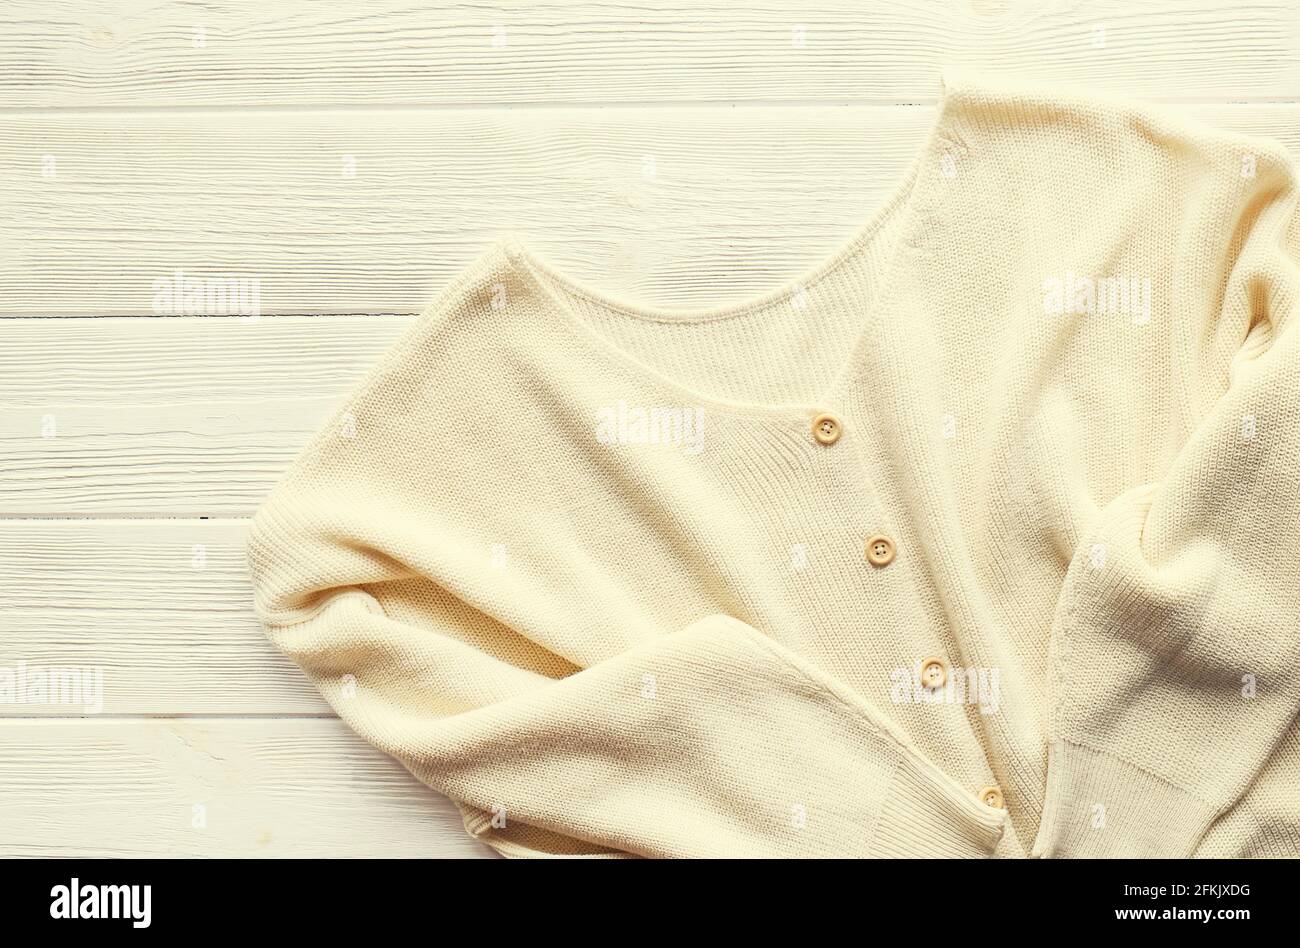 Fashionable easy chic casual style oversized sweater with buttons on white wood textured table background. Top view, close up, copy space. Stylish wom Stock Photo